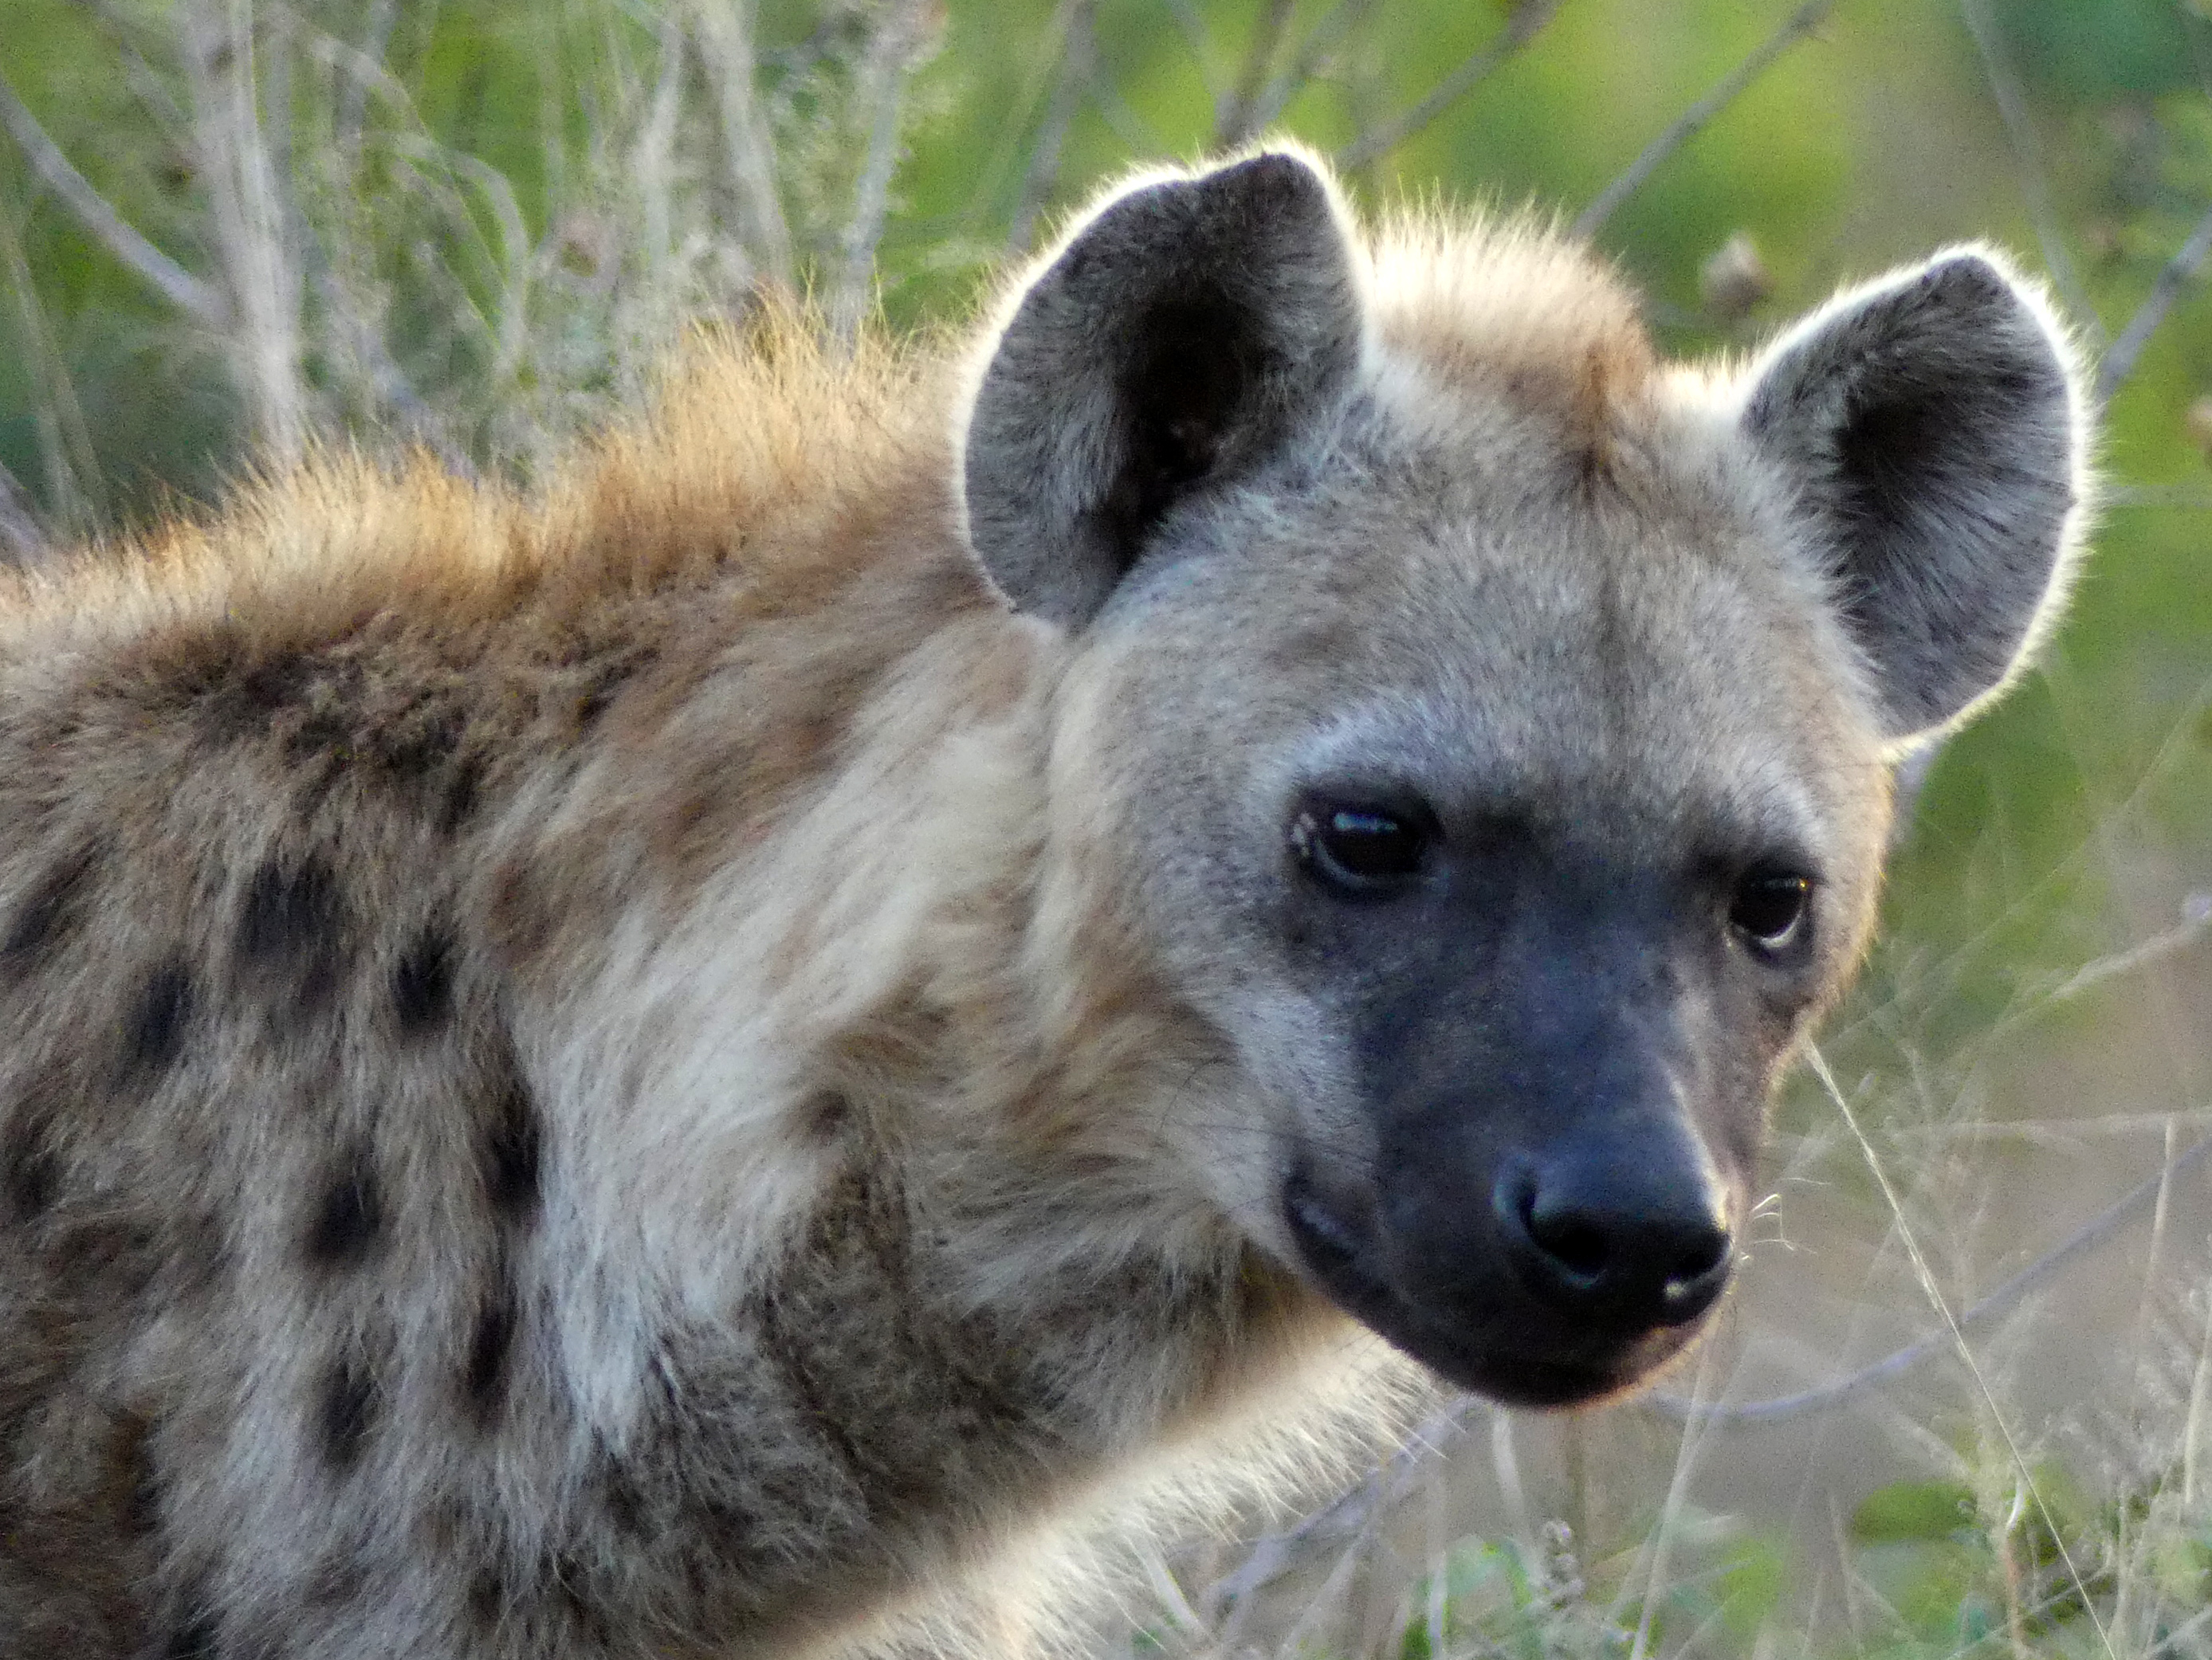 spotted hyena